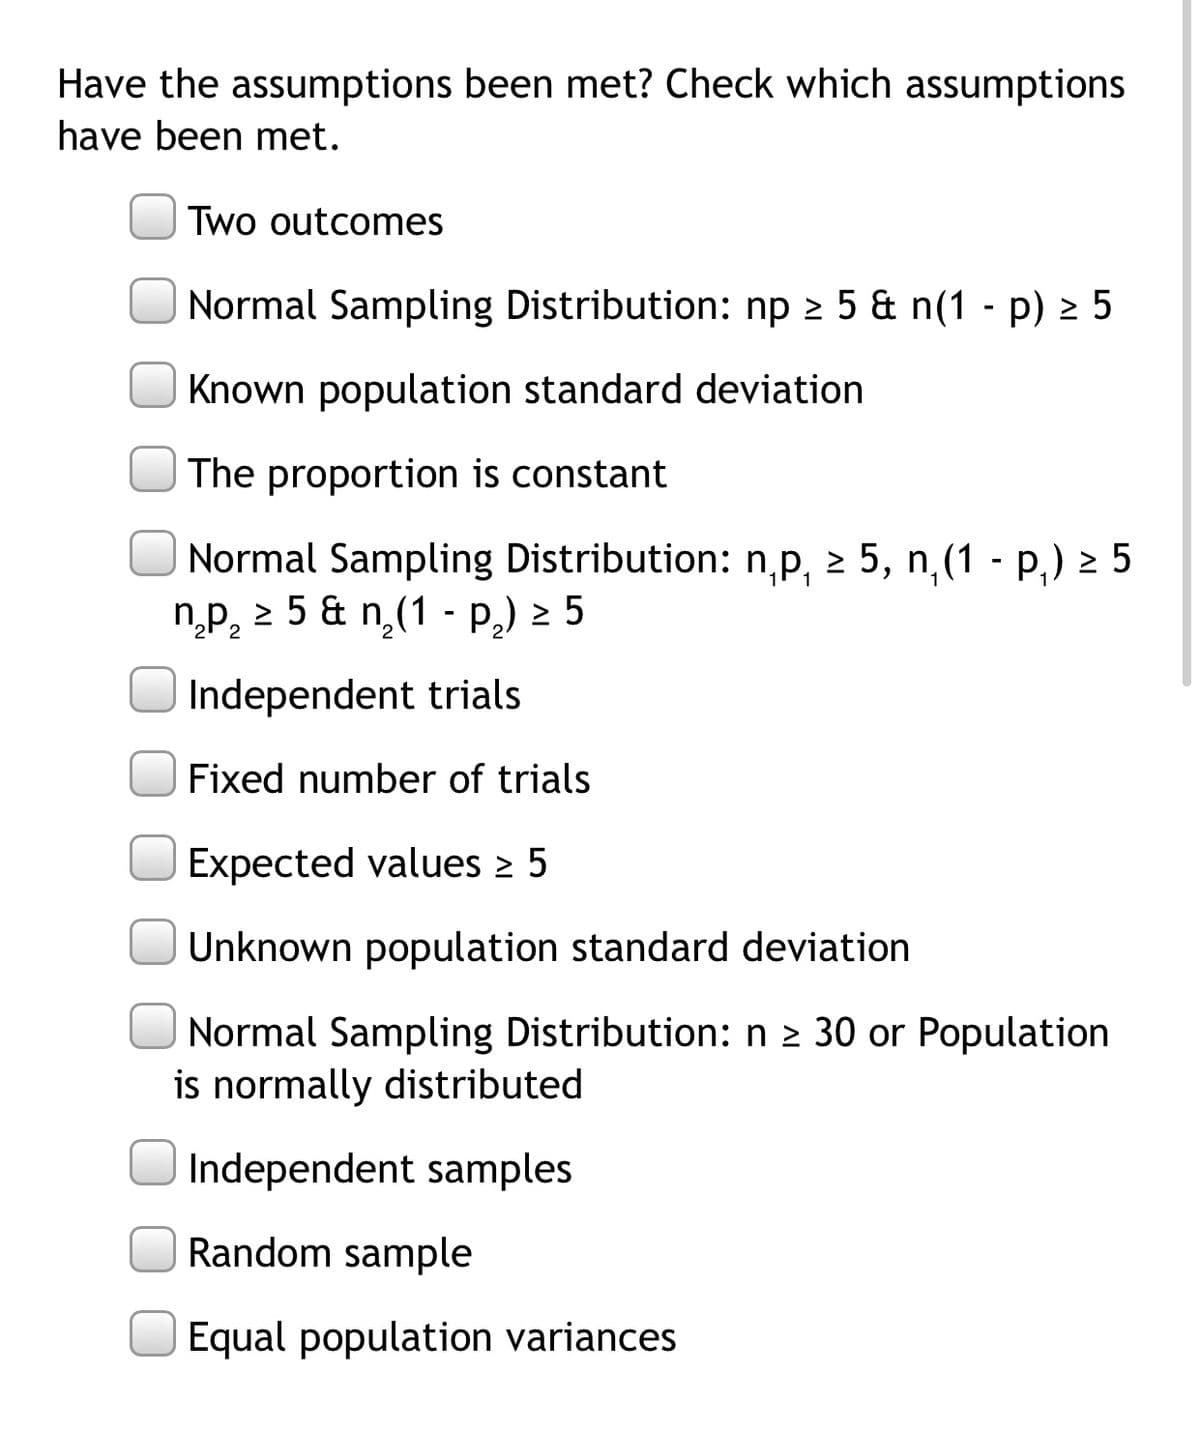 Have the assumptions been met? Check which assumptions
have been met.
Two outcomes
Normal Sampling Distribution: np 2 5 & n(1 - p) 2 5
Known population standard deviation
The proportion is constant
Normal Sampling Distribution: n,p, 2 5, n,(1 - P,) 2 5
np, 2 5 & n(1 - P,) 2 5
Independent trials
Fixed number of trials
Expected values 2 5
Unknown population standard deviation
Normal Sampling Distribution: n 2 30 or Population
is normally distributed
Independent samples
Random sample
Equal population variances
